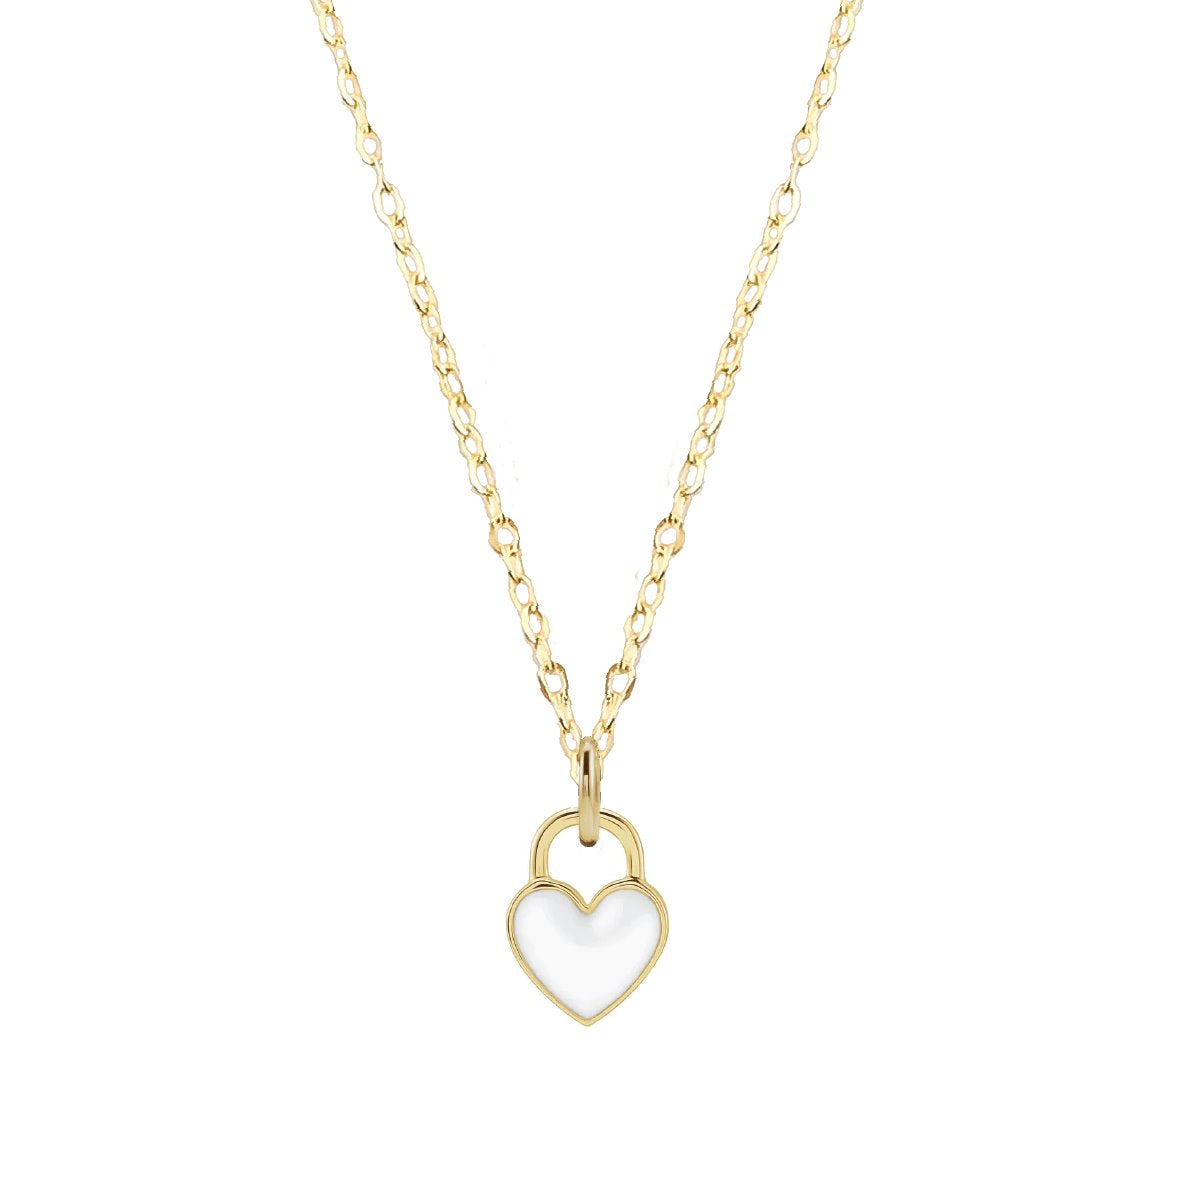 White Enamel Heart Necklace or Charm Necklace Robyn Canady 14K Solid Gold 14K Gold Filled 